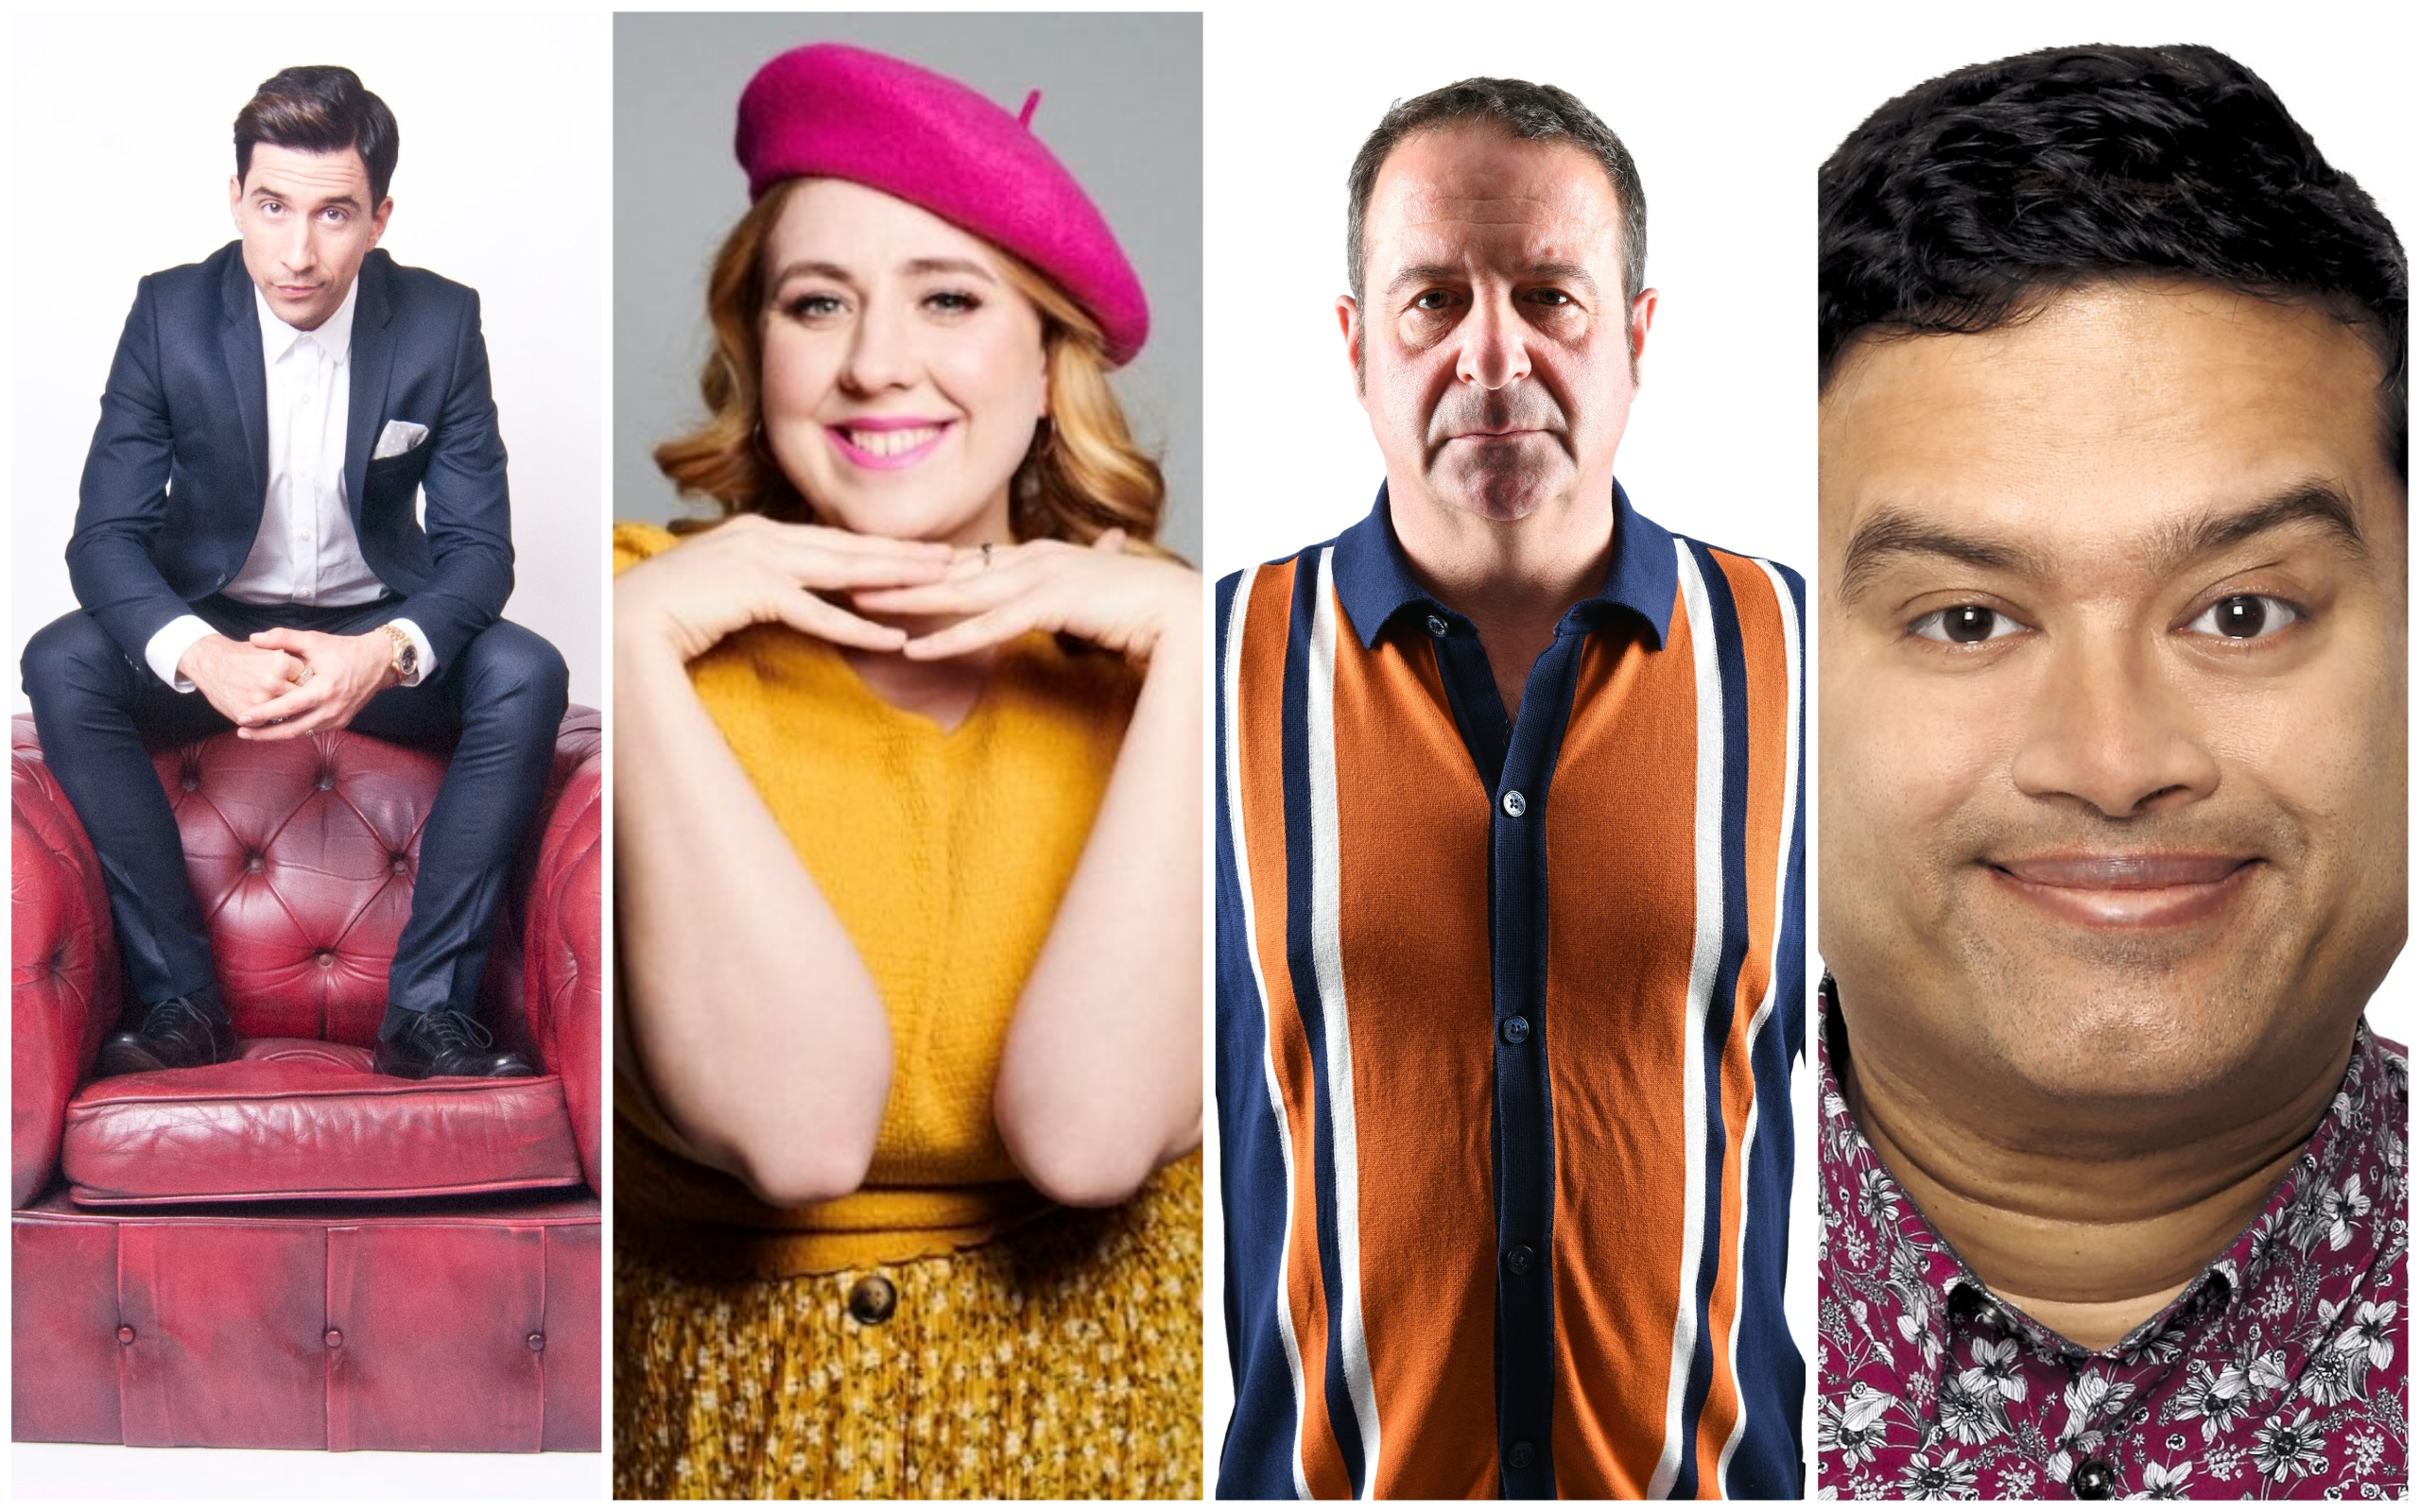 Southport Comedy Festival will feature top comedians including: Russell Kane, Helen Bauer, Mark Thomas and Paul Sinha